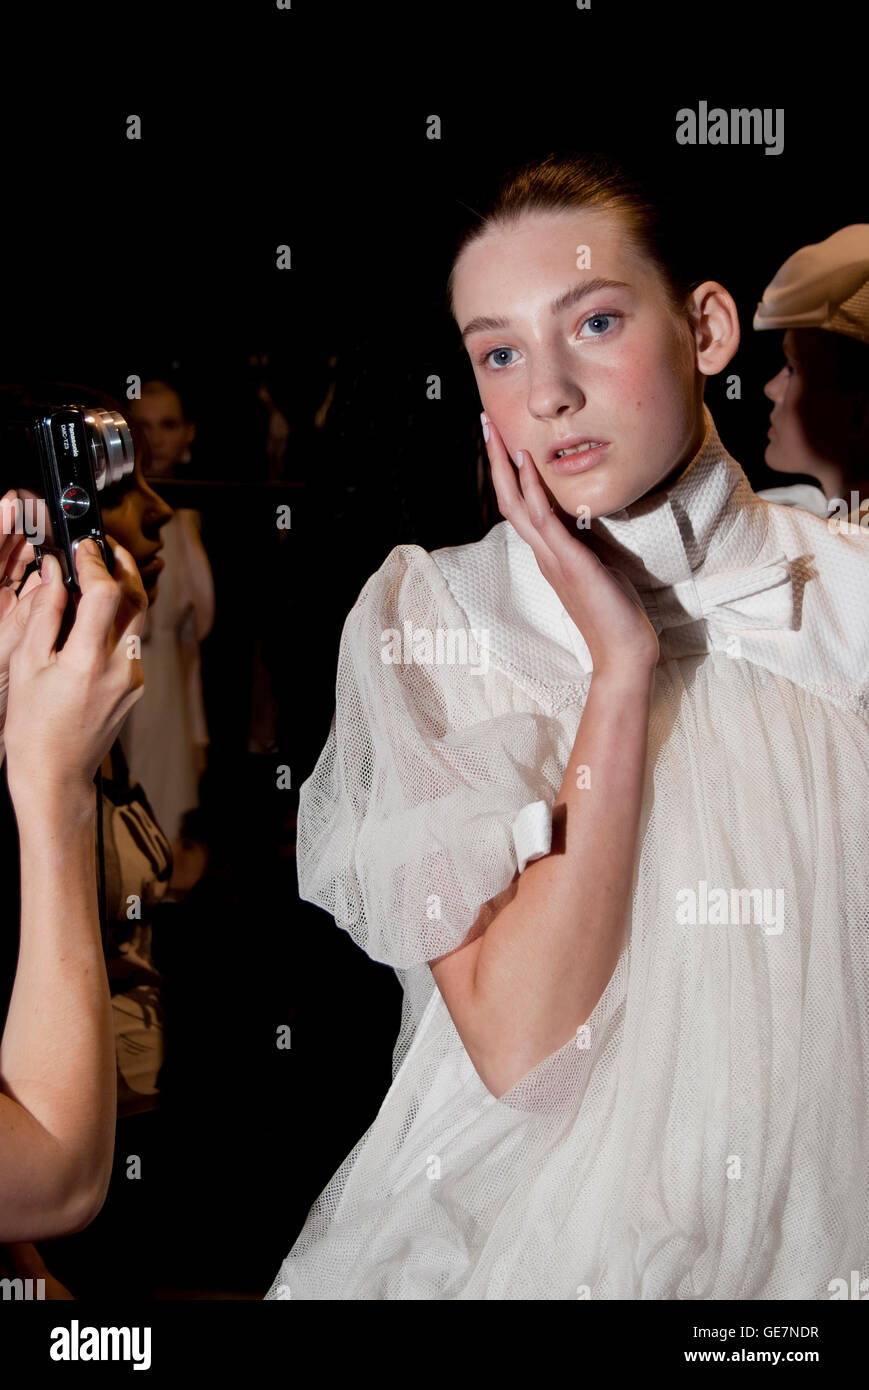 fashion model being photographed backstage at London Fashion week Stock ...